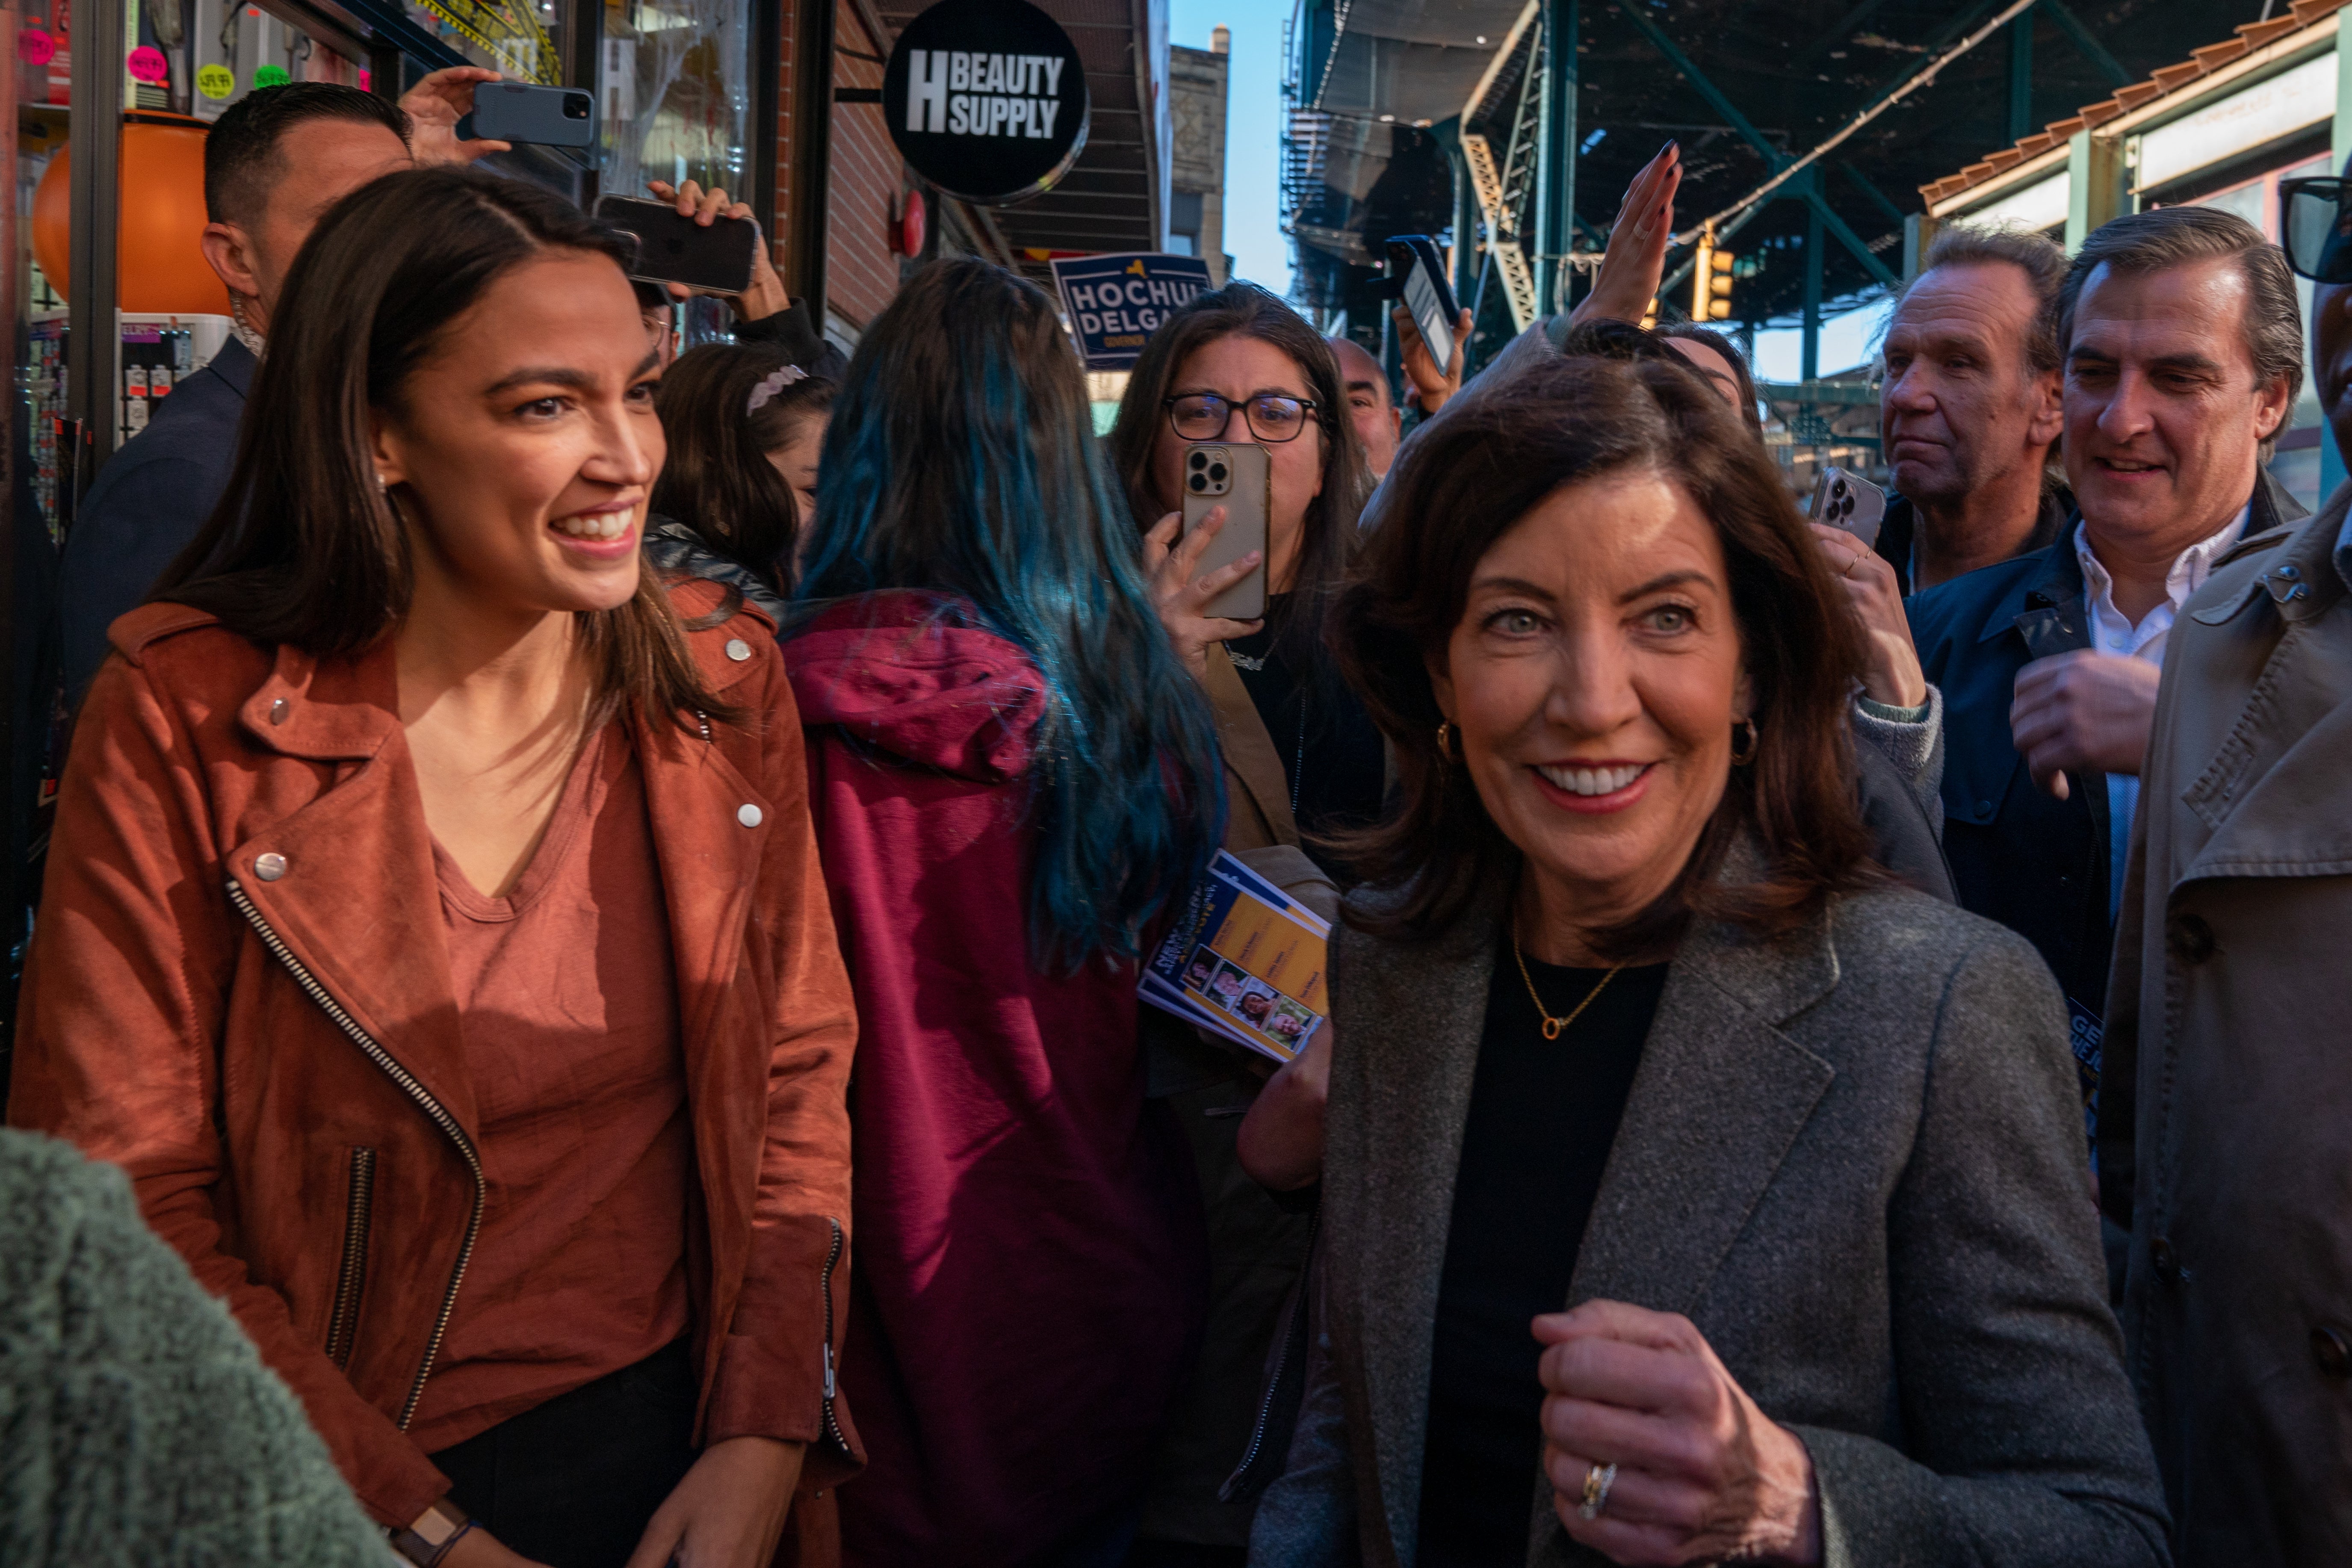 New York Congresswoman Alexandria Ocasio-Cortez campaigned with Governor Kathy Hochul on Election Day.